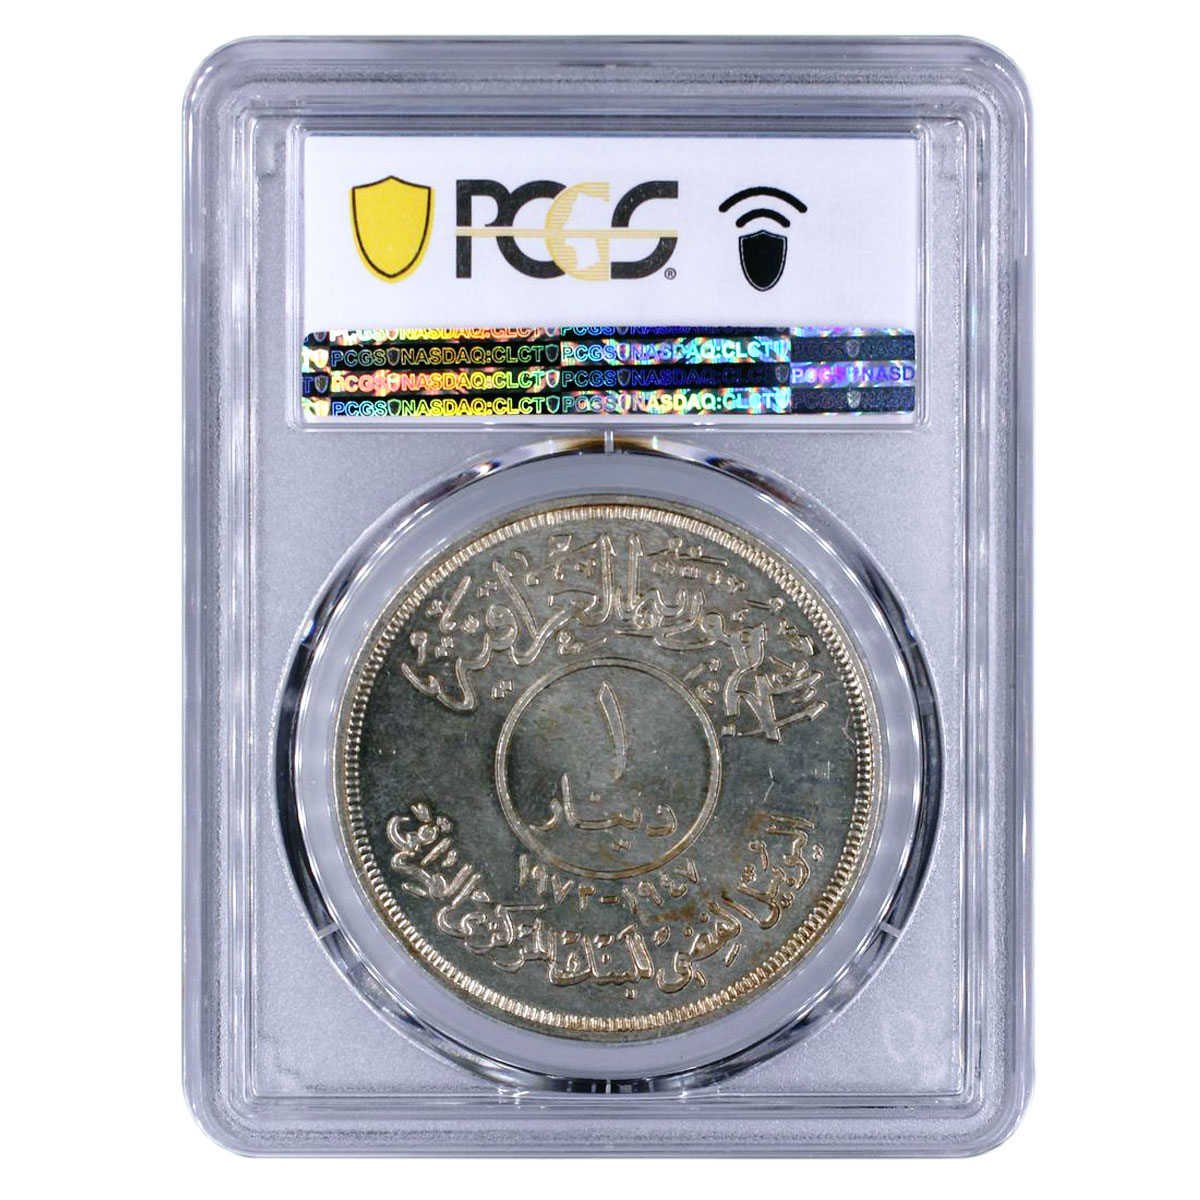 Iraq 1 dinar 25th Anniversary of Central Bank MS66 PCGS silver coin 1972